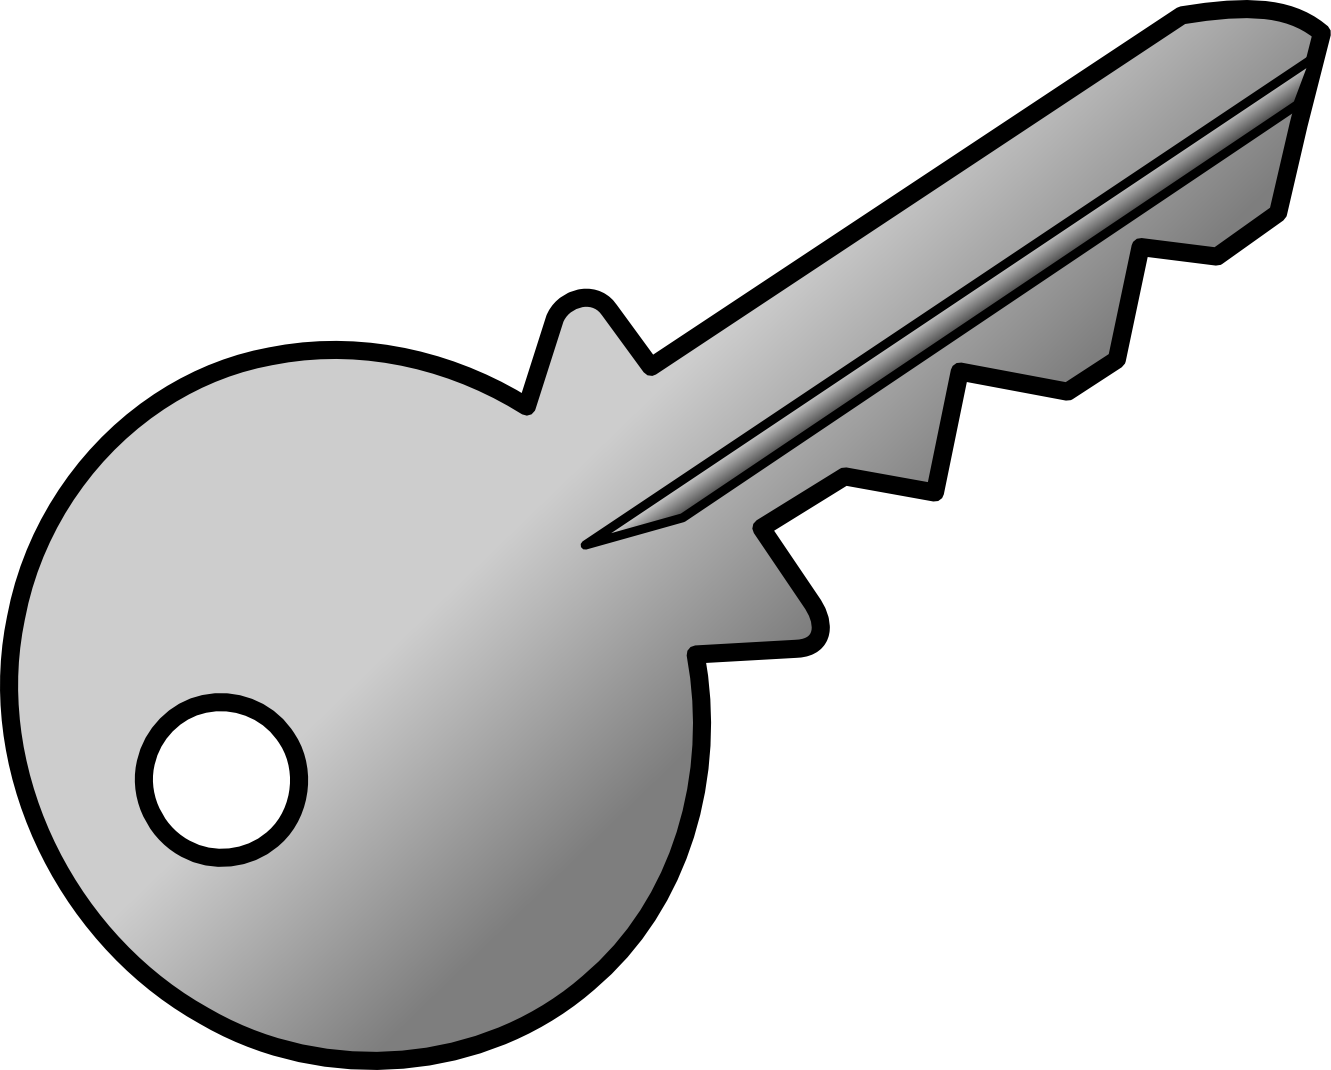 Image Result For Key Holding - Key Clipart (1331x1070)